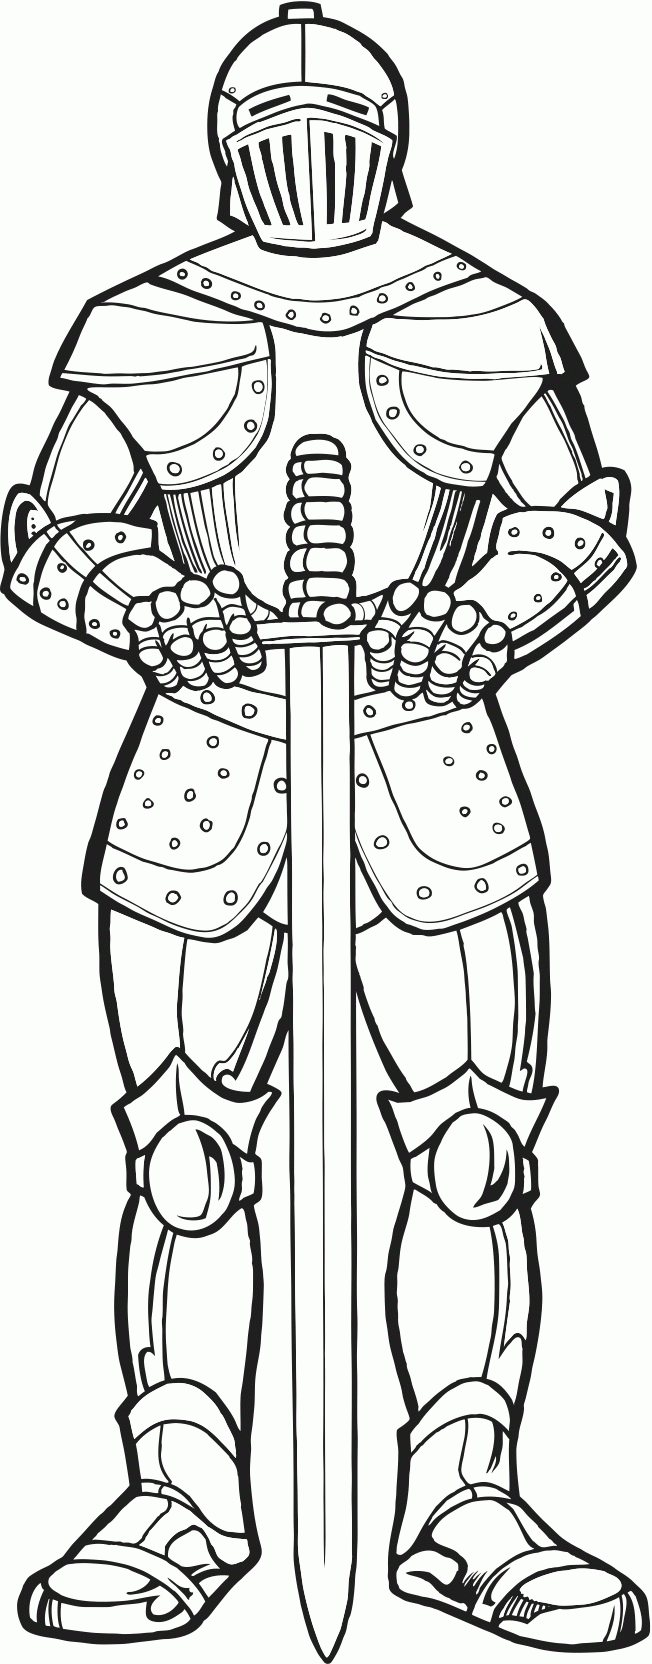 Knight Coloring Pages - Widetheme